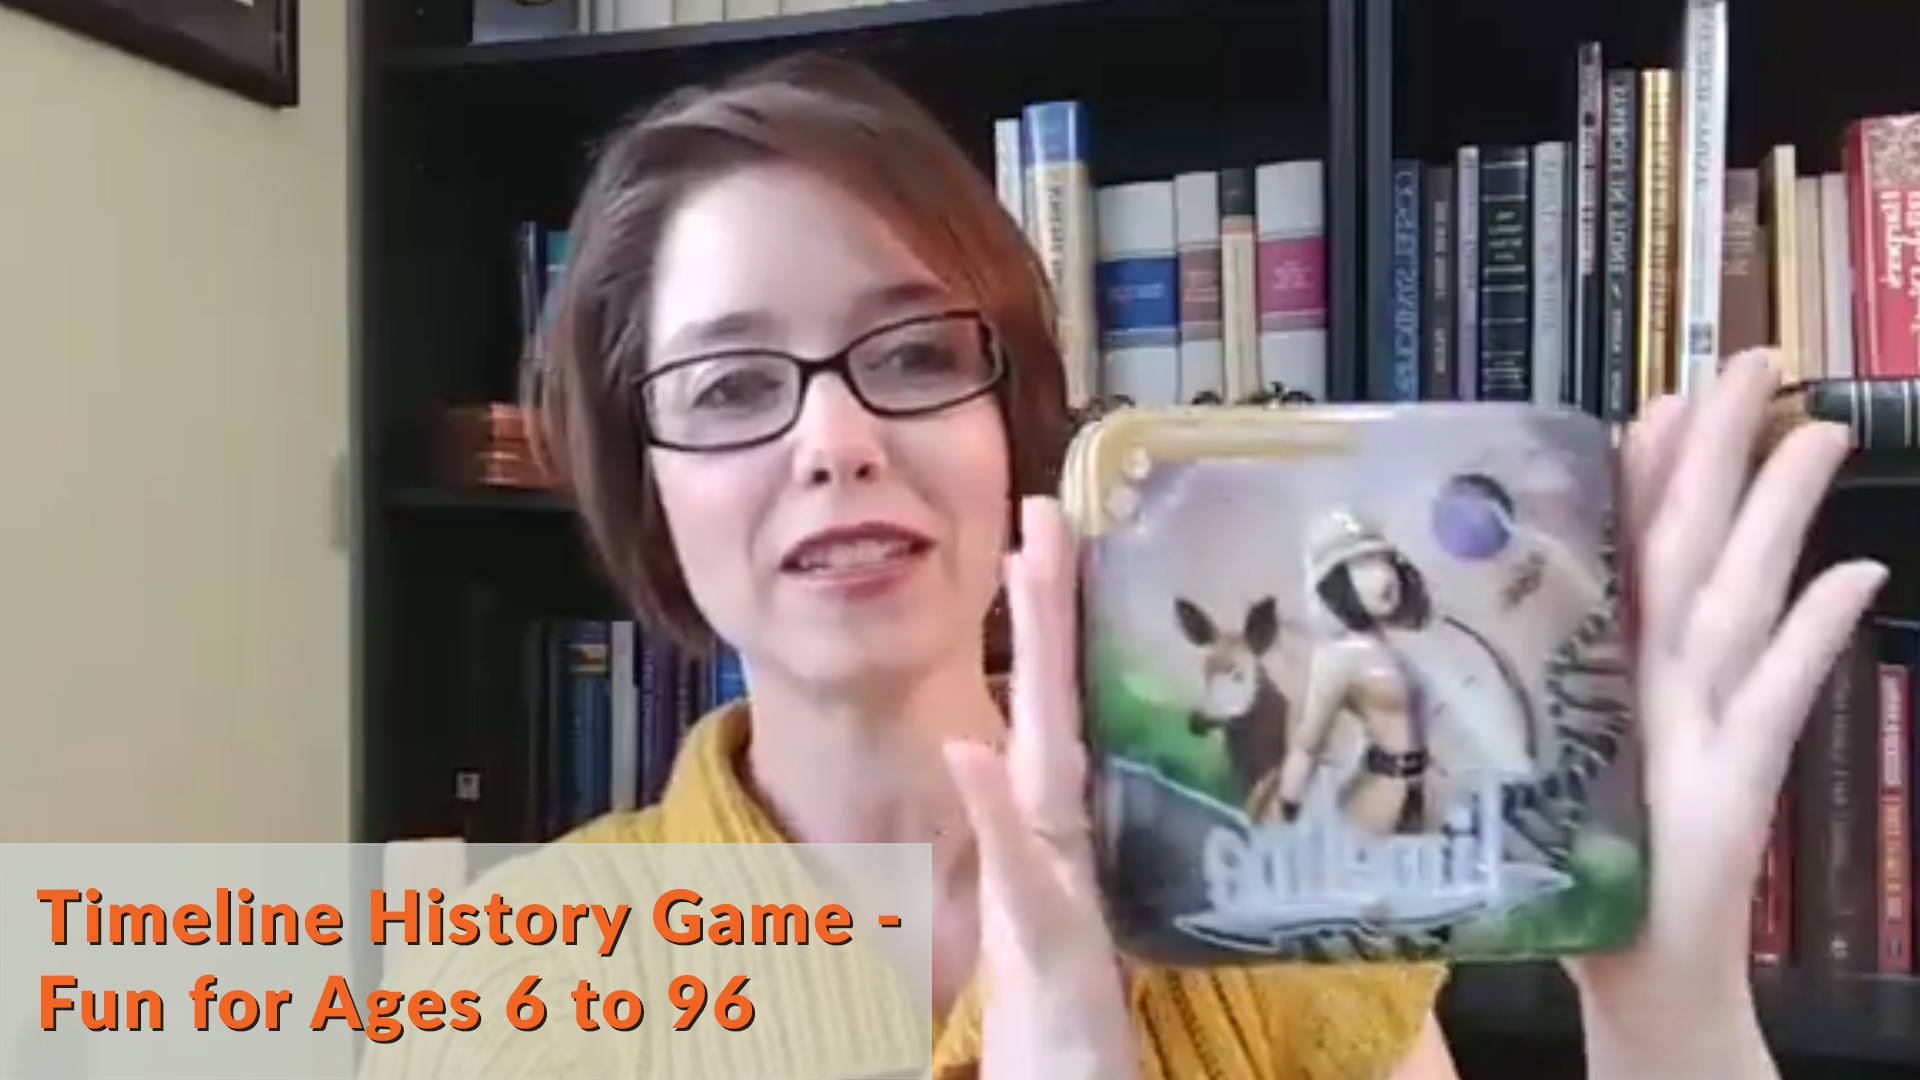 Timeline History Game Review -- Fun for Ages 6 to 96